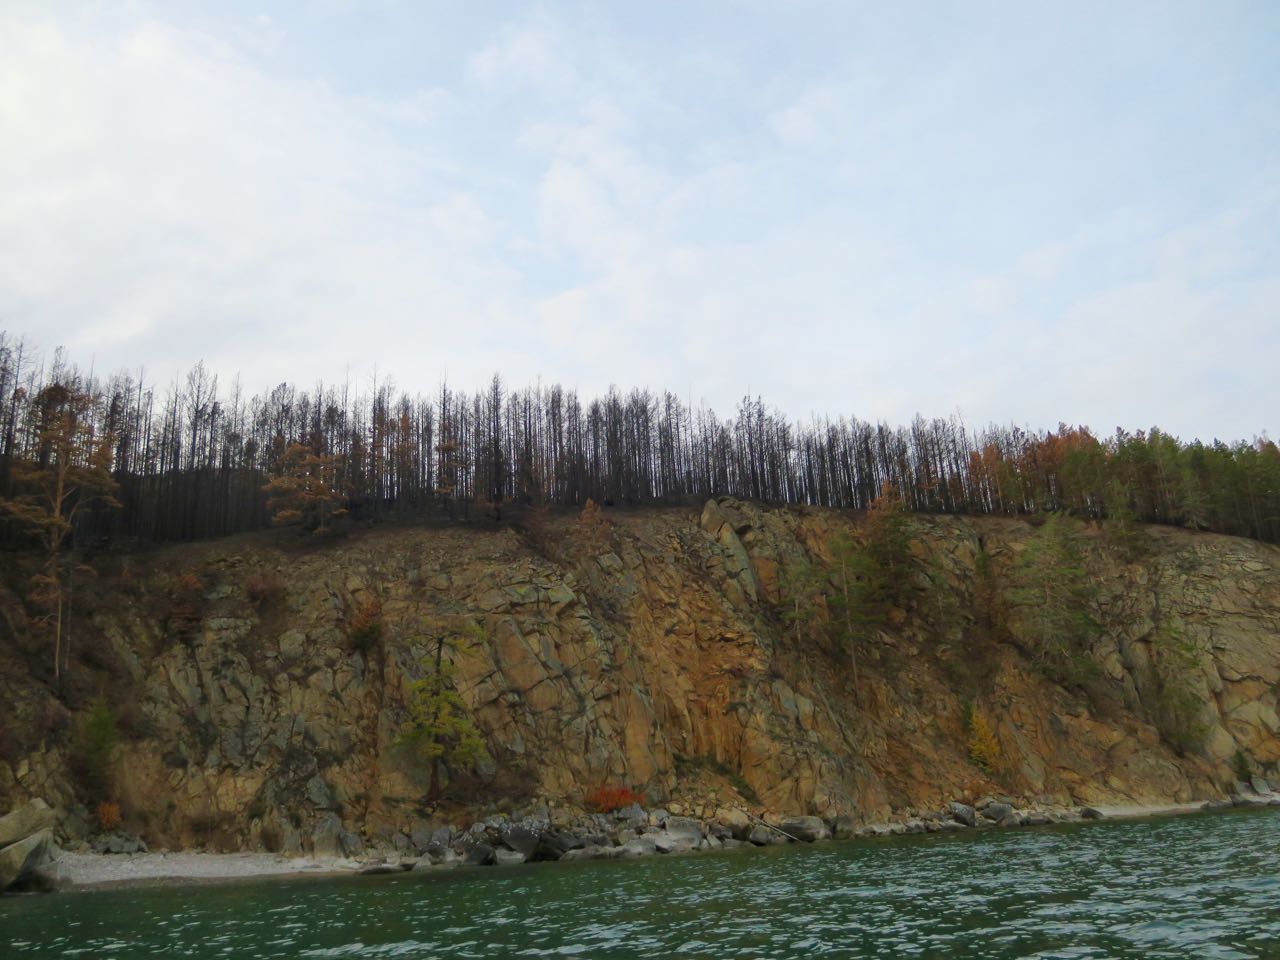 shore line - there were serious forest fires this summer around Lake Baikal